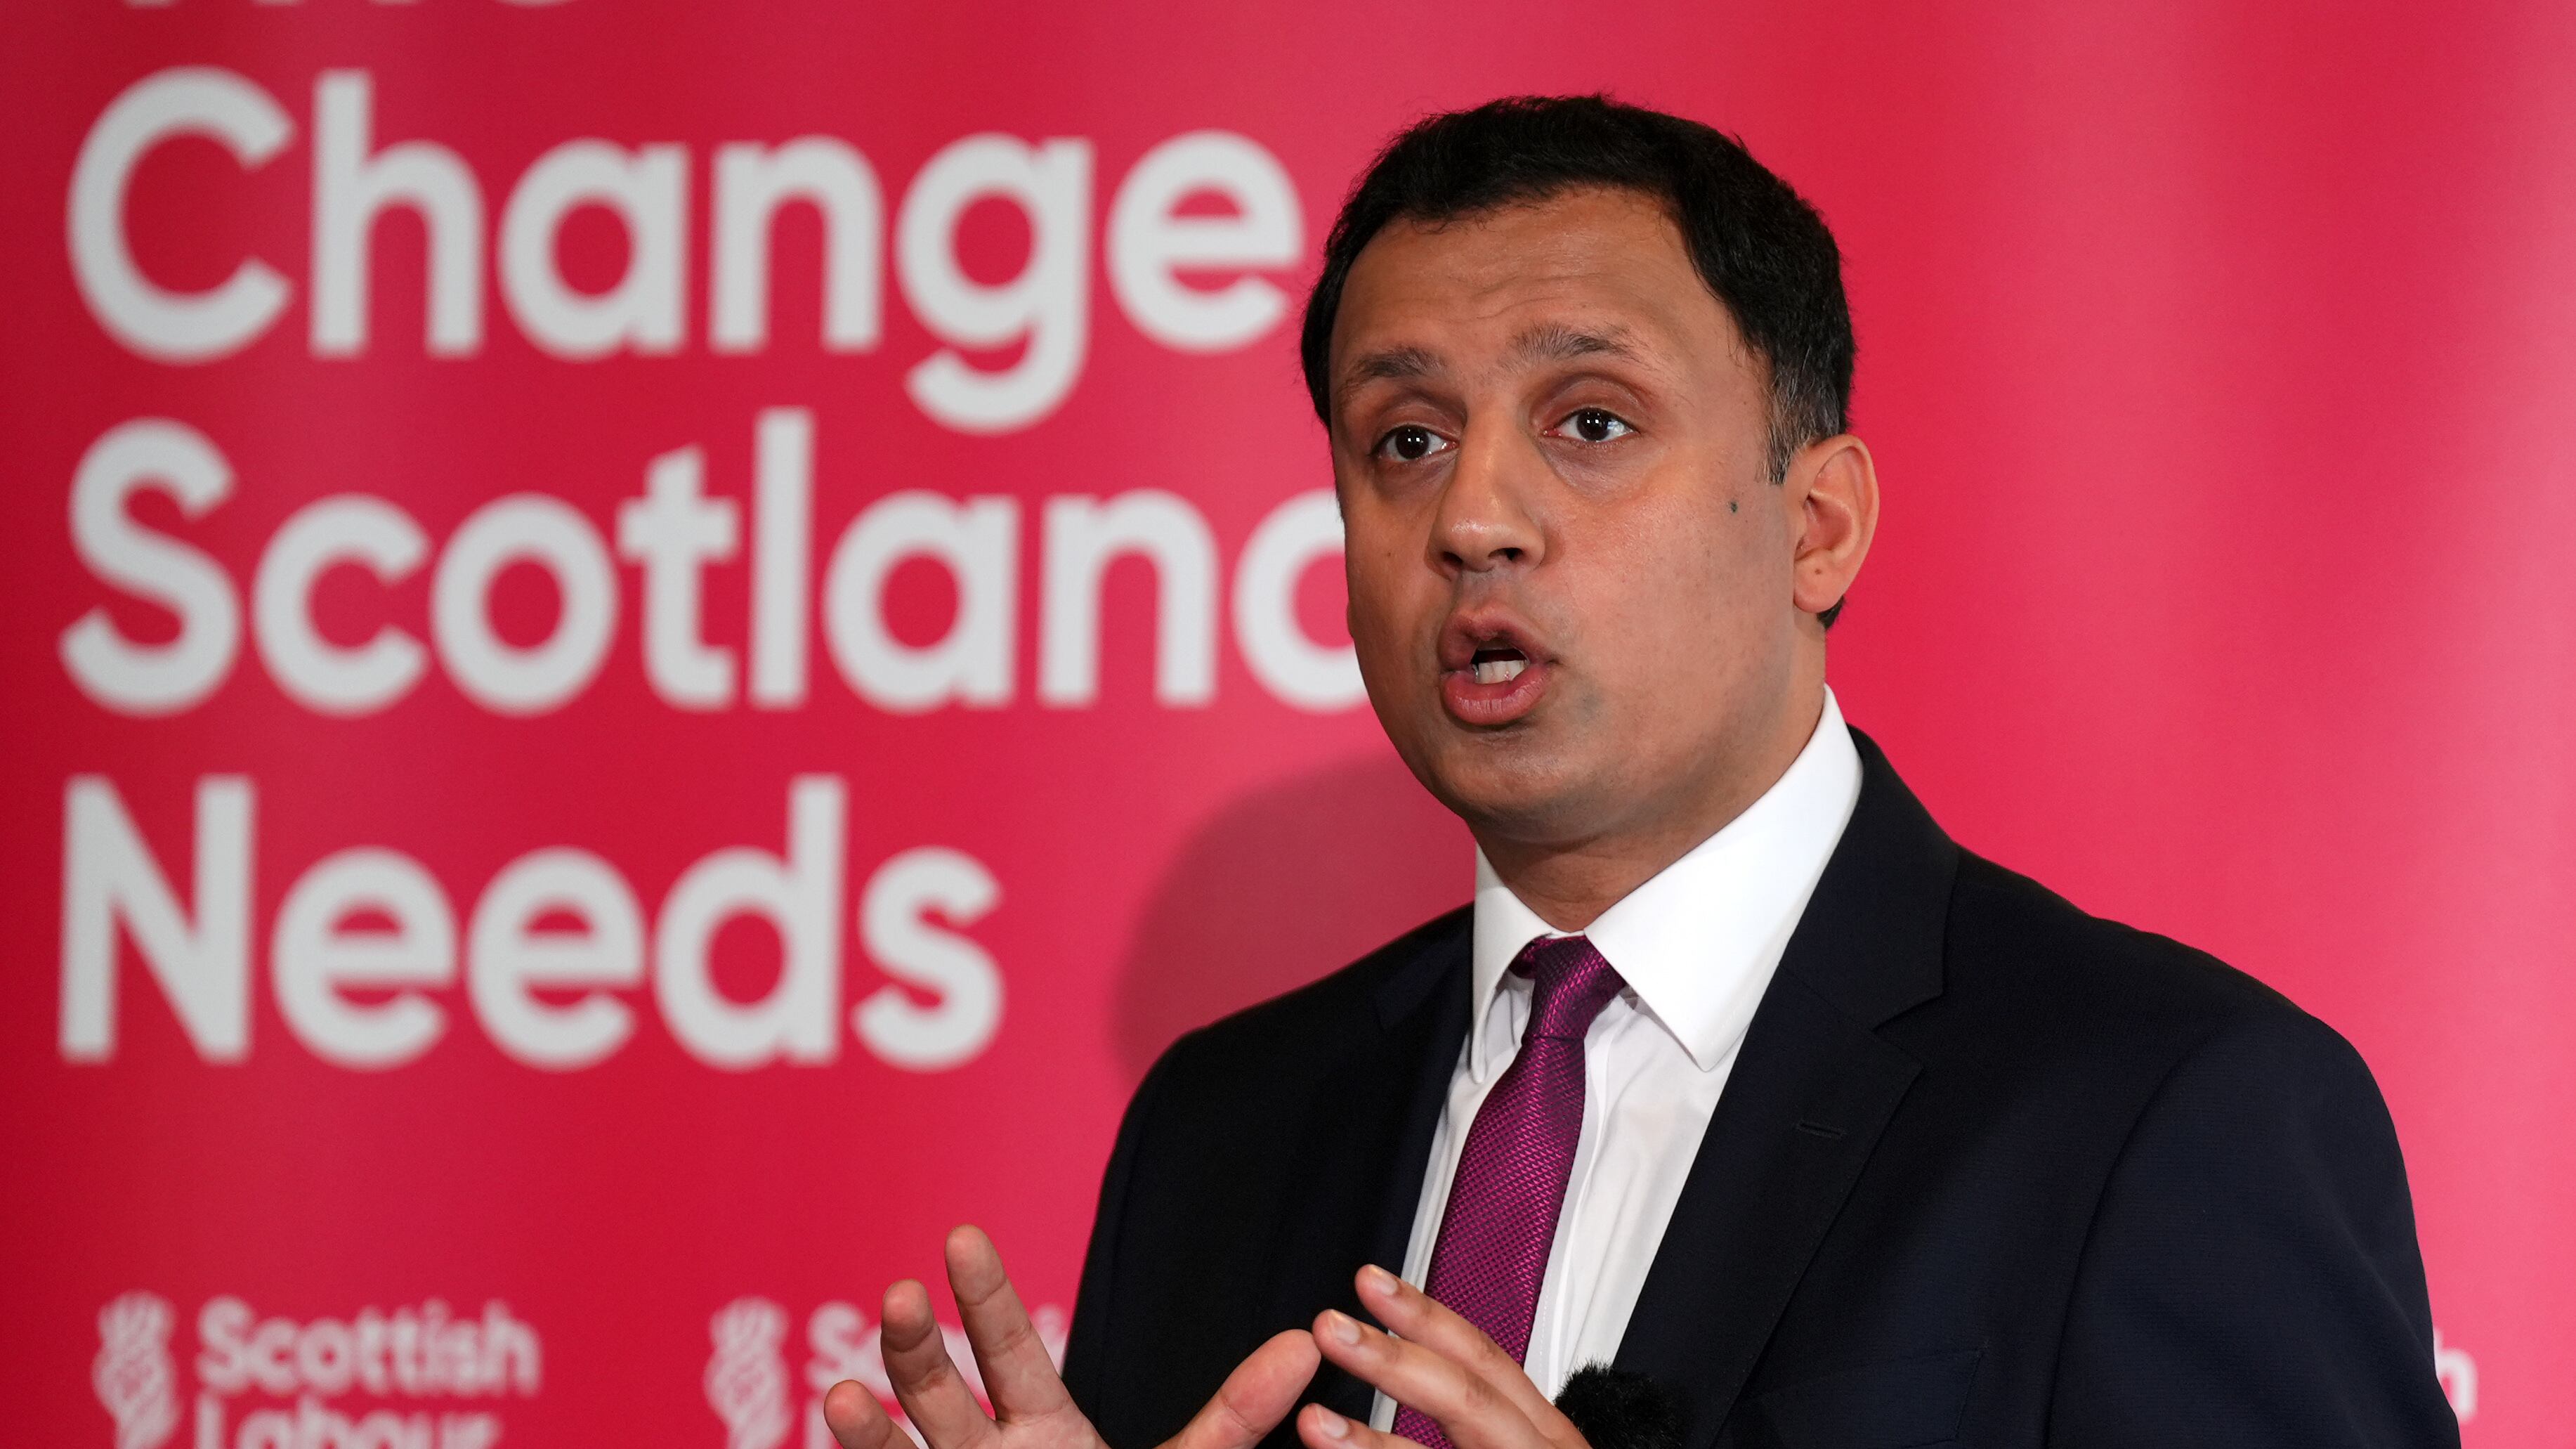 Scottish Labour leader Anas Sarwar said he hopes his party will use the General Election as a ‘stepping stone’ to Holyrood election success